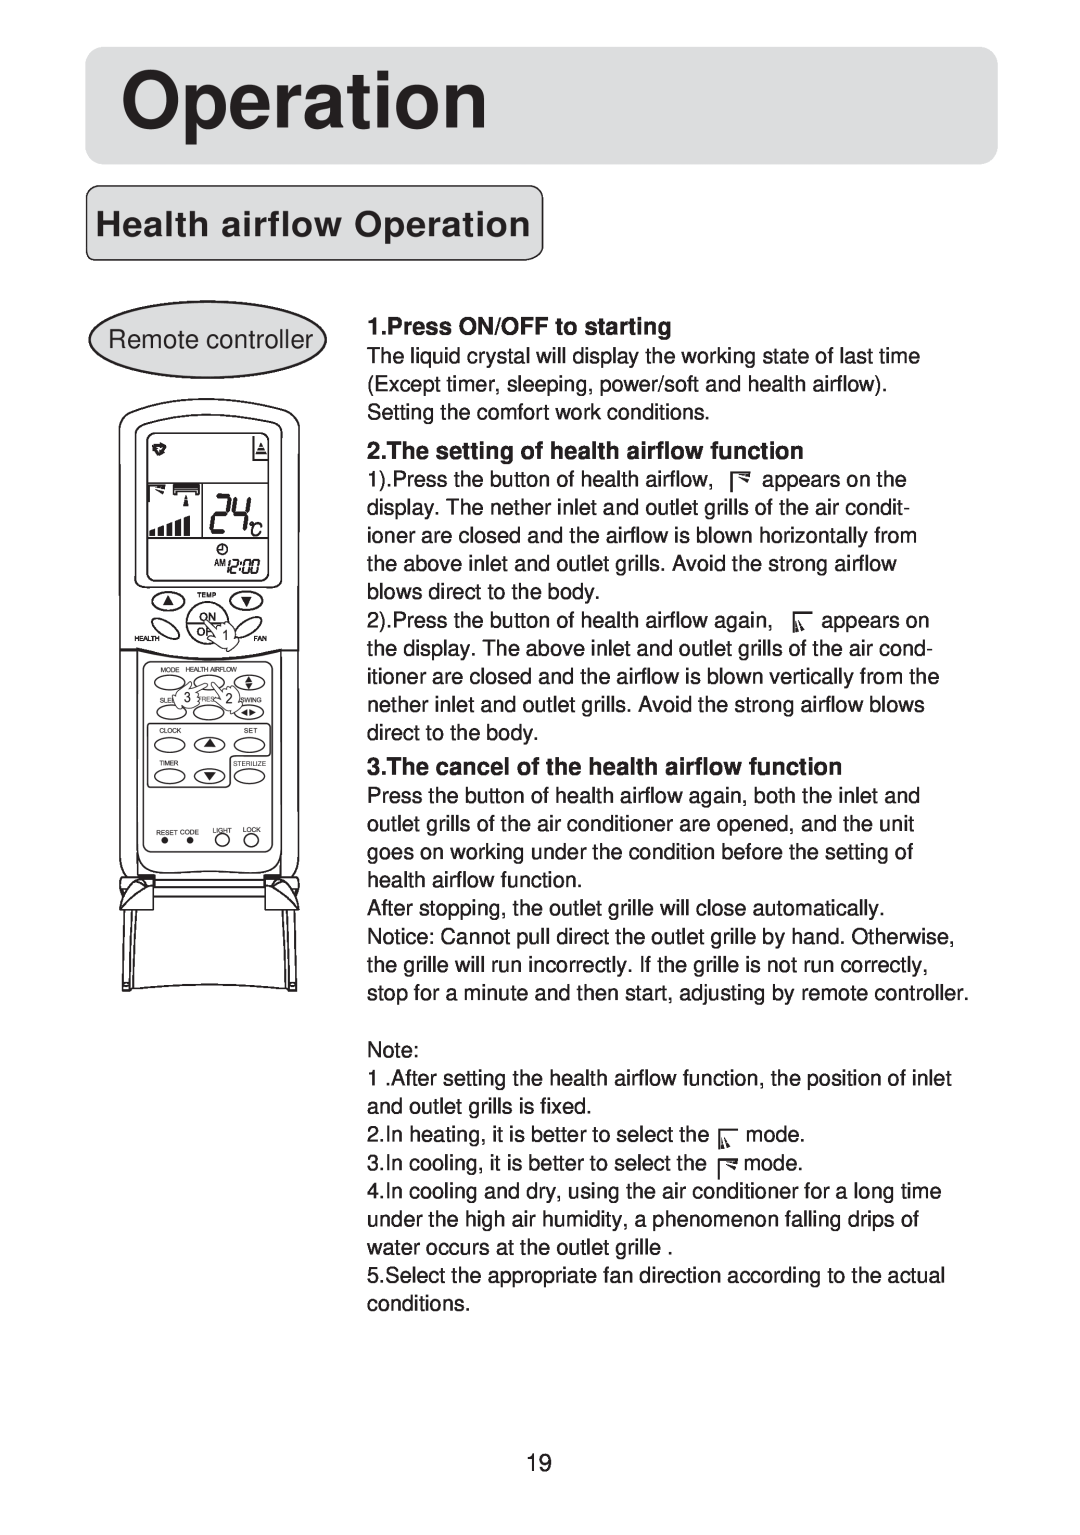 Haier HSU-09HV03/R2(SDB) Health airflow Operation, Press ON/OFF to starting, The setting of health airflow function 